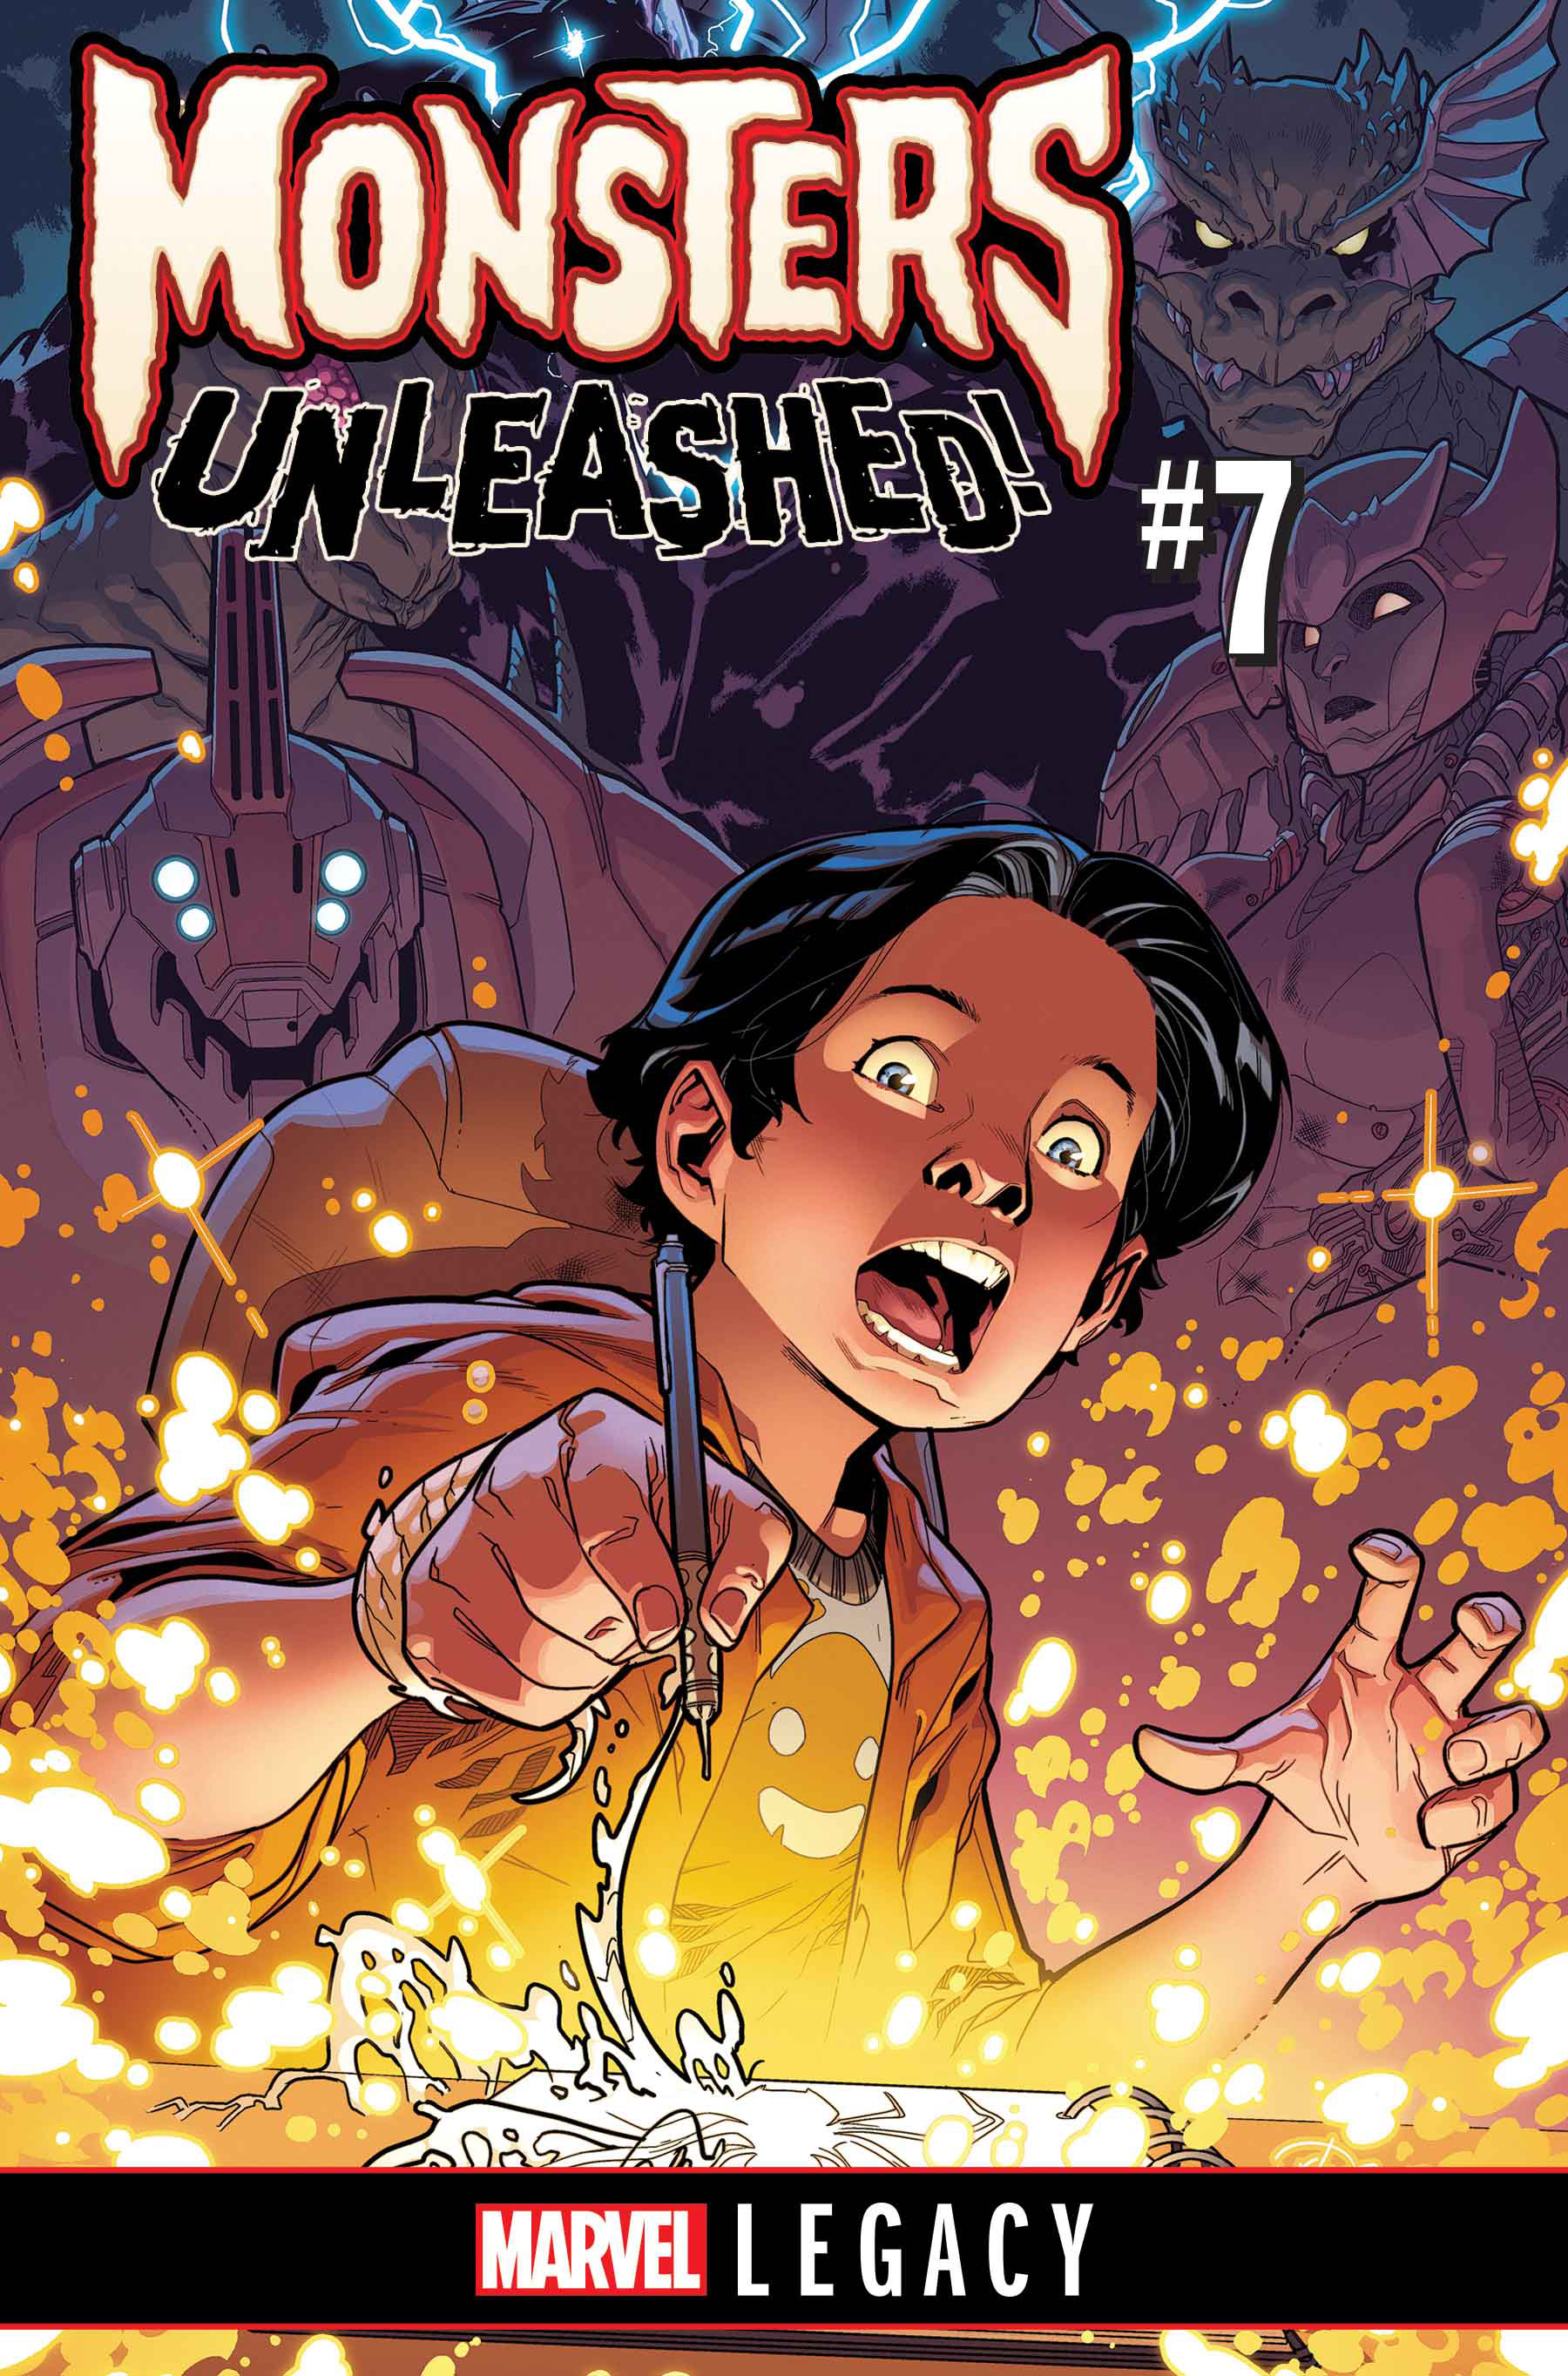 MONSTERS UNLEASHED #7 